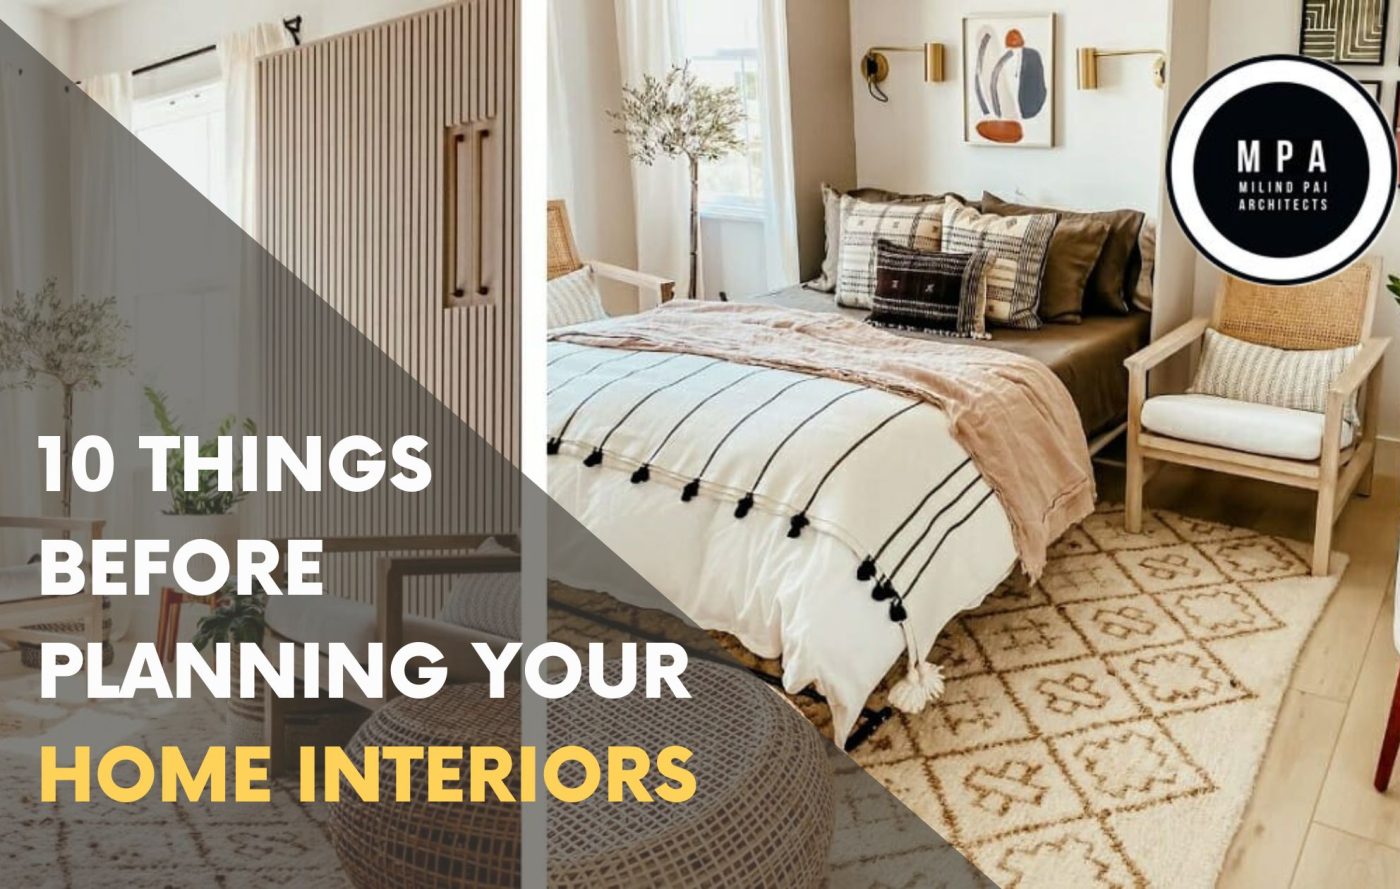 10 Things Before Planning Your Home Interiors